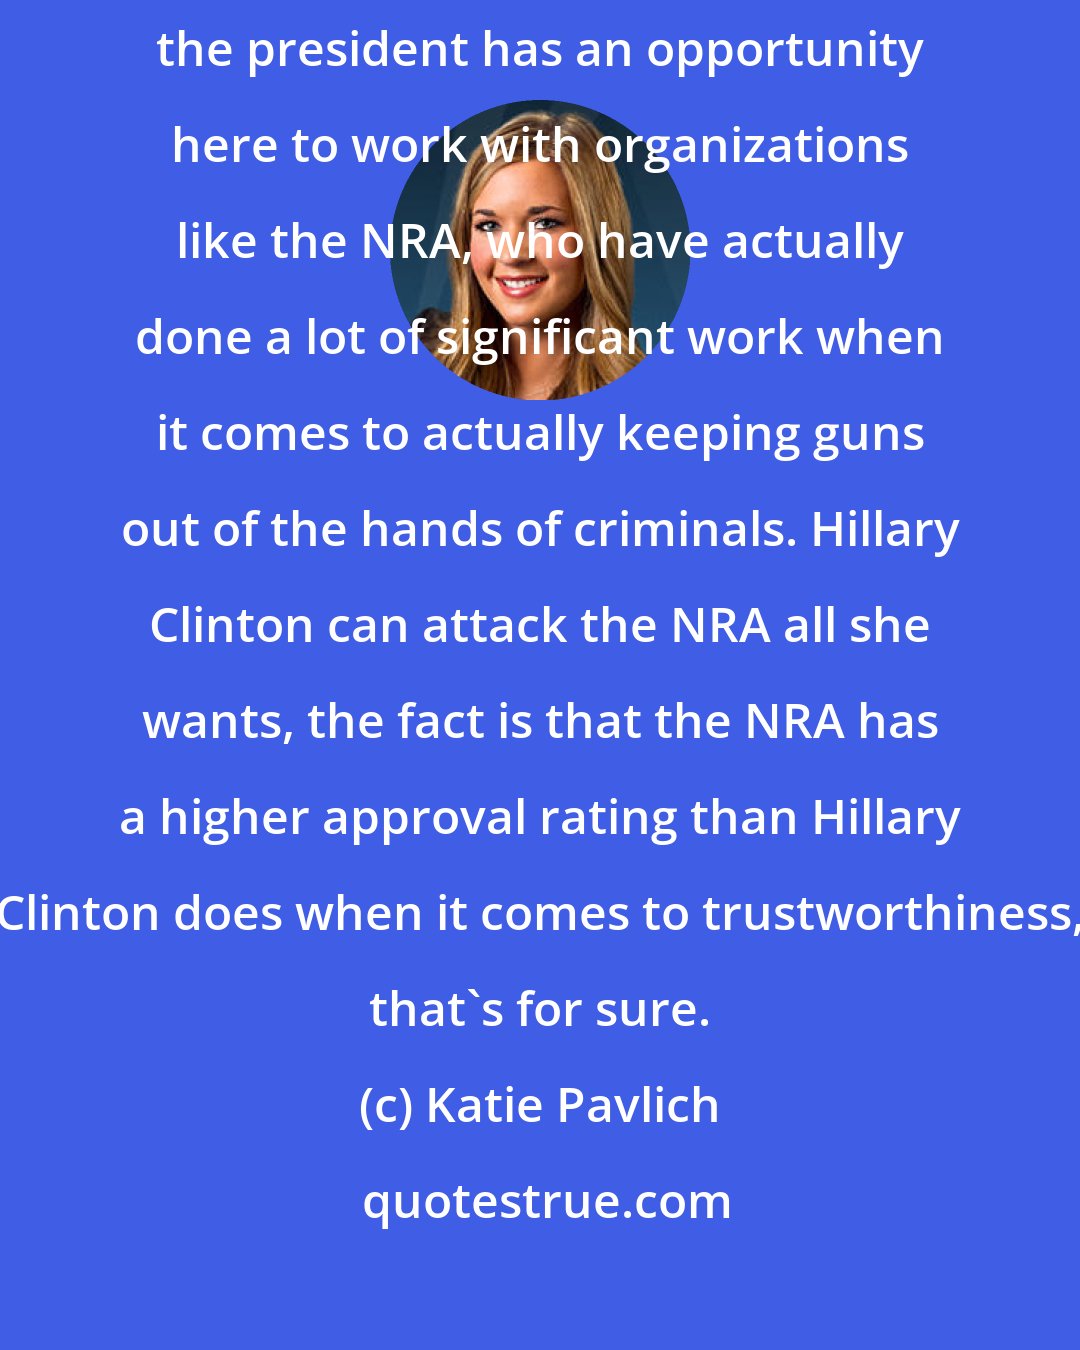 Katie Pavlich: It's not going to do anything. And it really is disappointing because the president has an opportunity here to work with organizations like the NRA, who have actually done a lot of significant work when it comes to actually keeping guns out of the hands of criminals. Hillary Clinton can attack the NRA all she wants, the fact is that the NRA has a higher approval rating than Hillary Clinton does when it comes to trustworthiness, that's for sure.